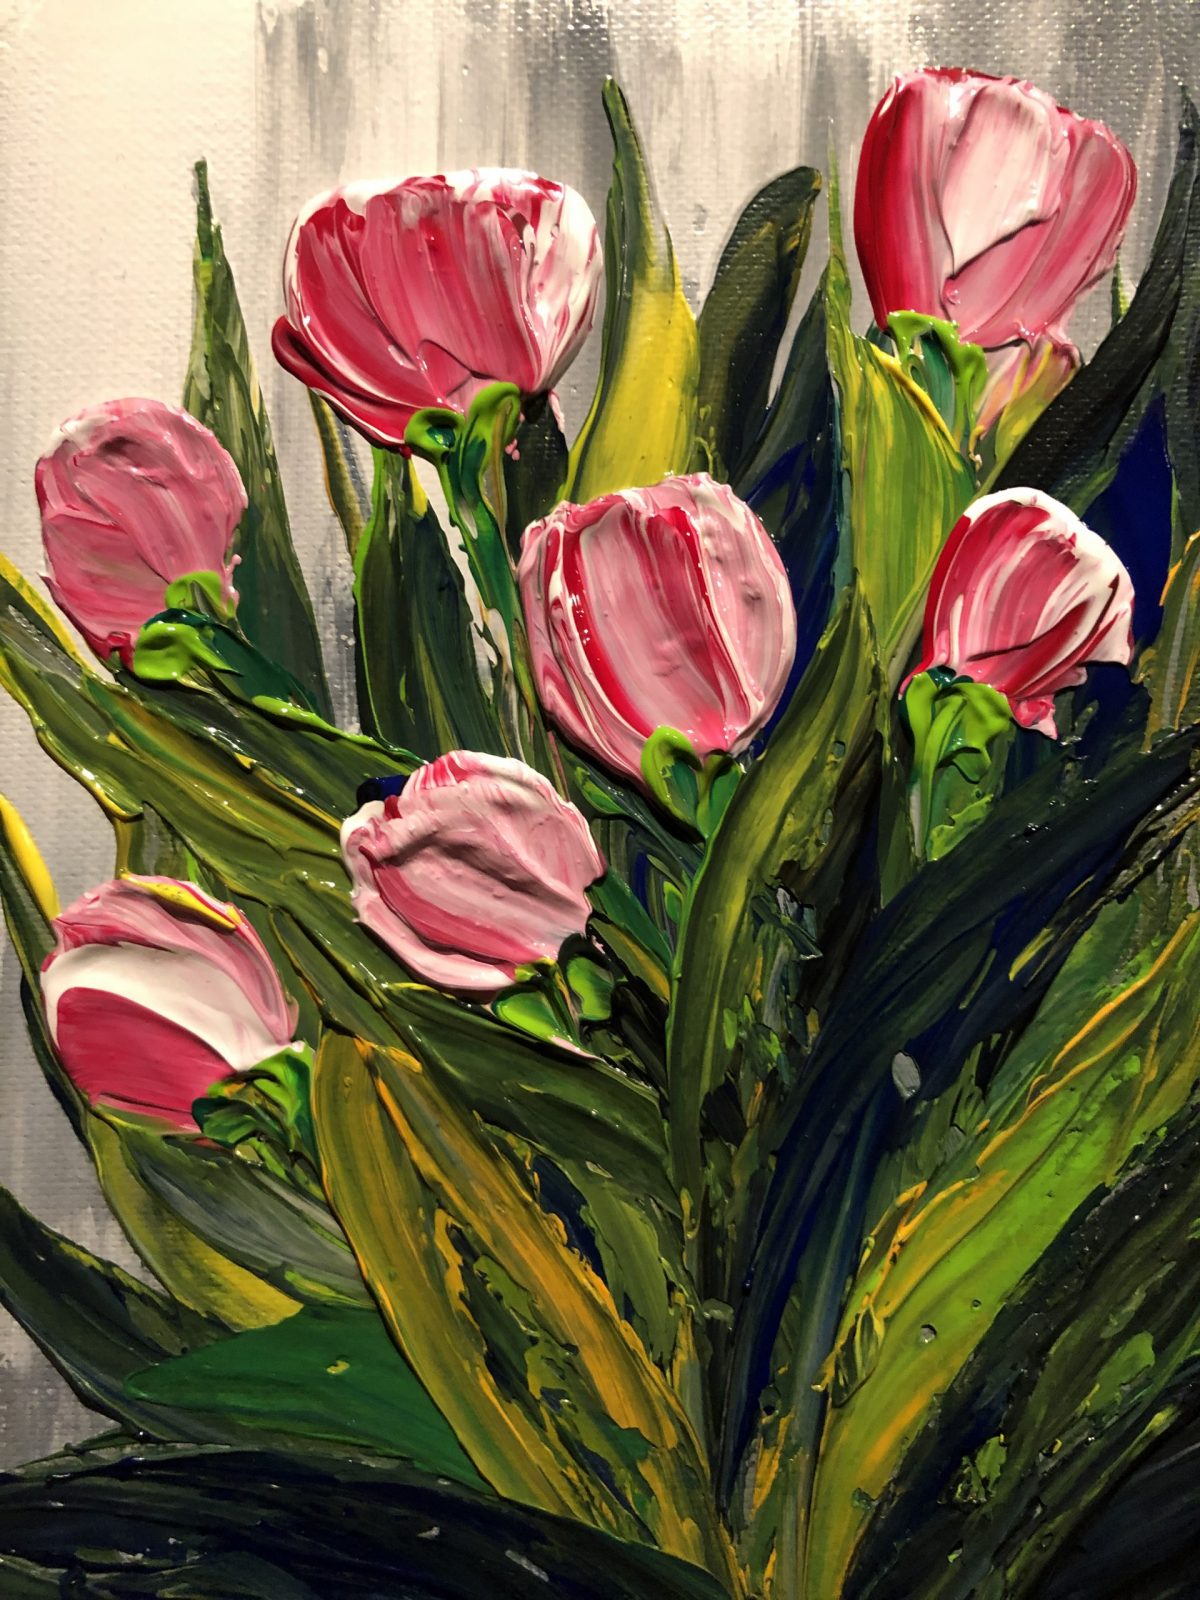 Tulips, created by Kate_Art and Katarzyna Boduch